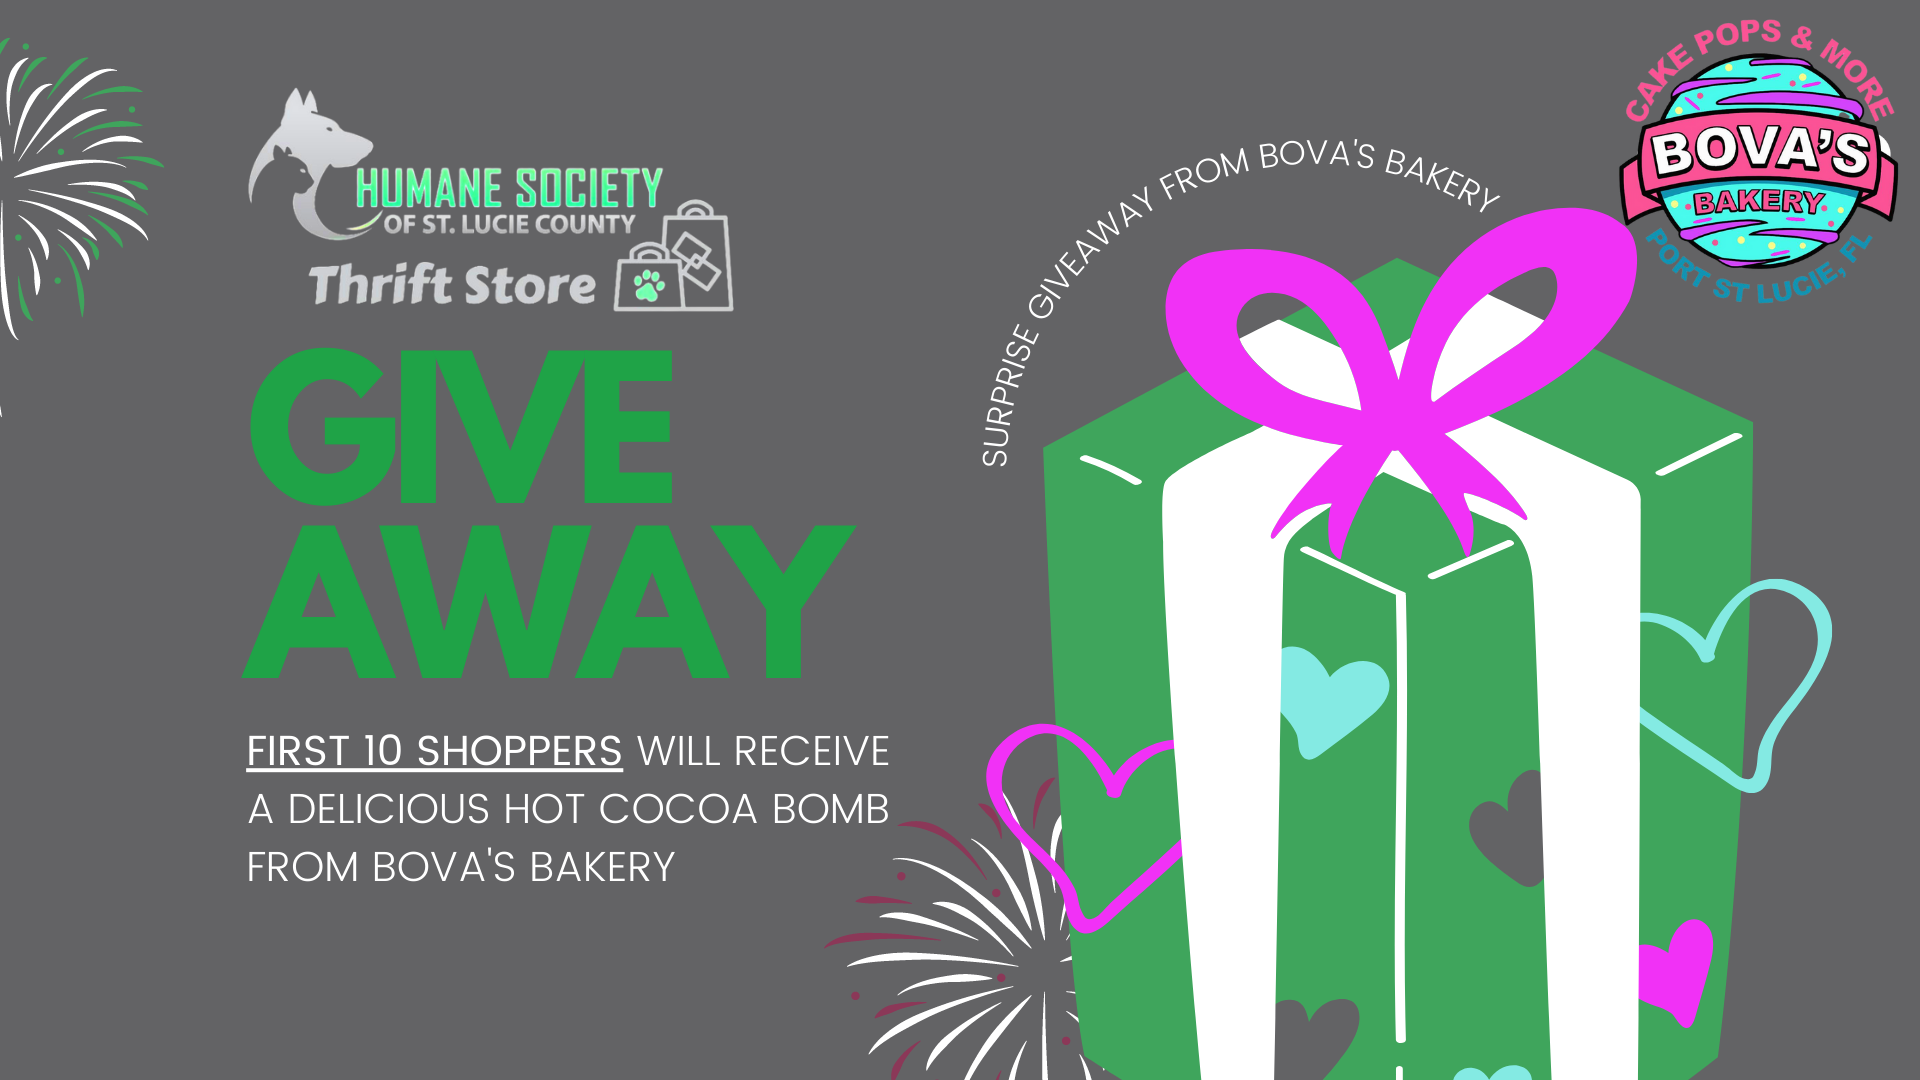 Humane Society of St. Lucie County Thrift Store Giveaway with Bova's Bakery